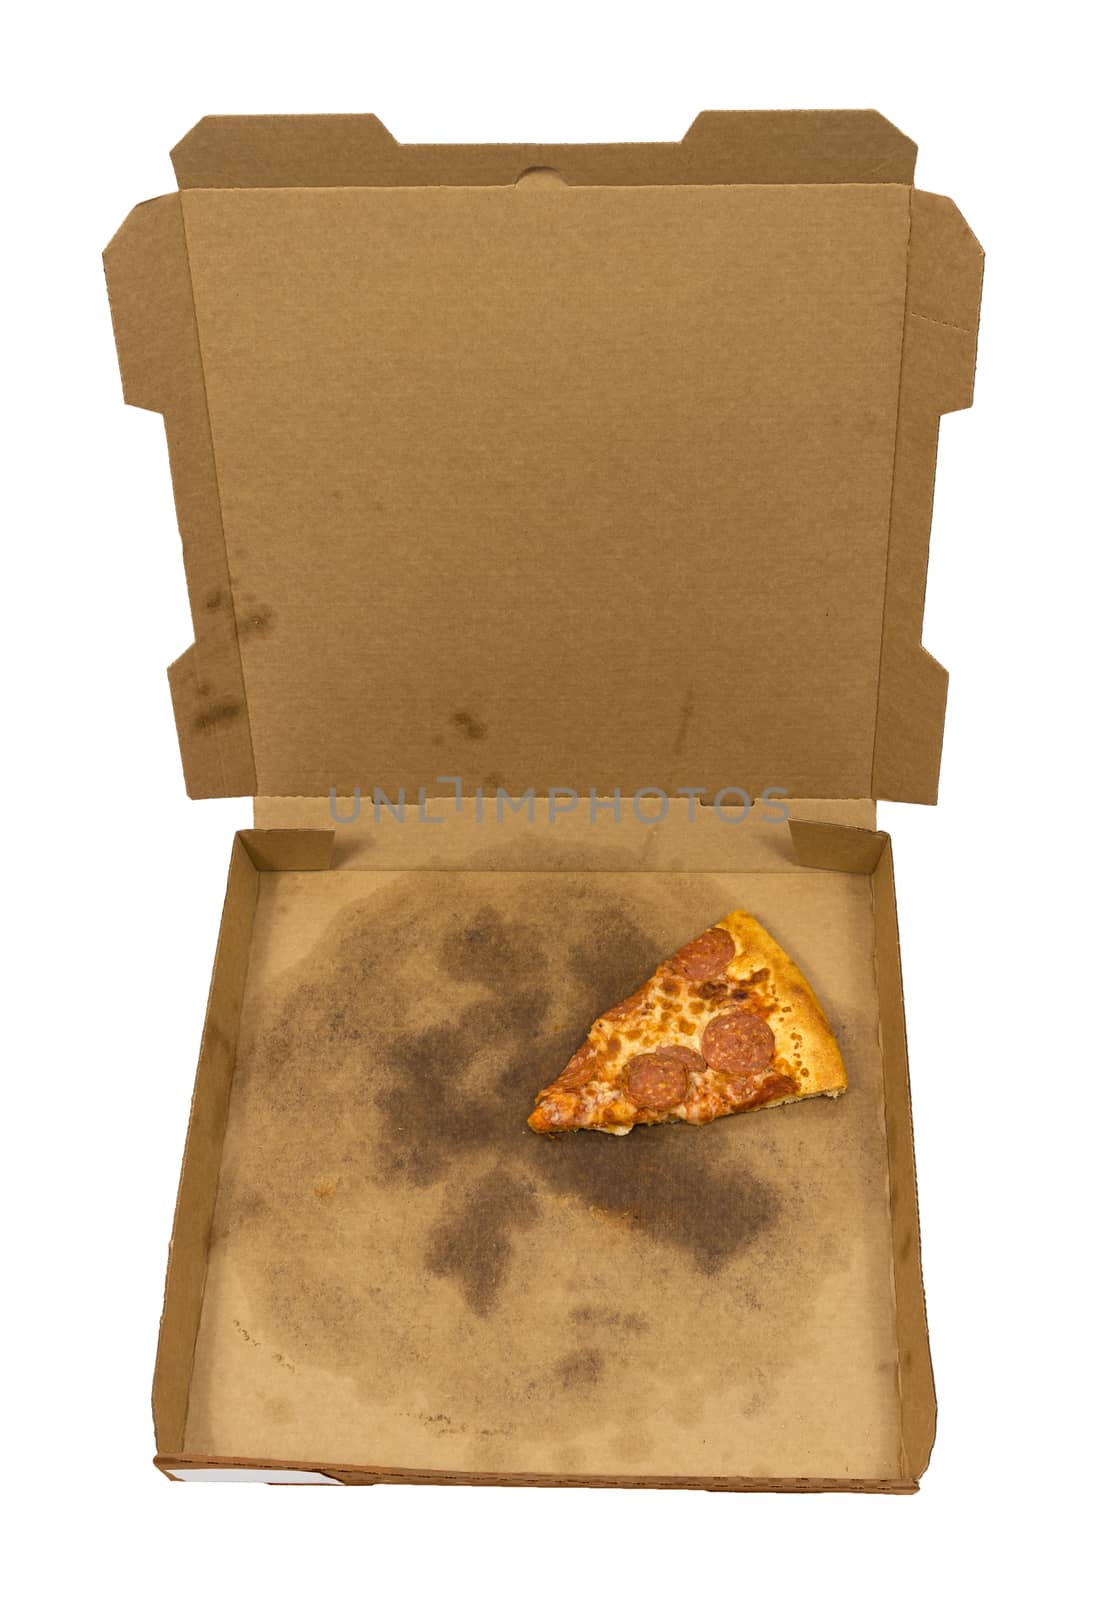 Vertical overhead shot of the last slice of pepperoni pizza left in delivery box isolated on white background